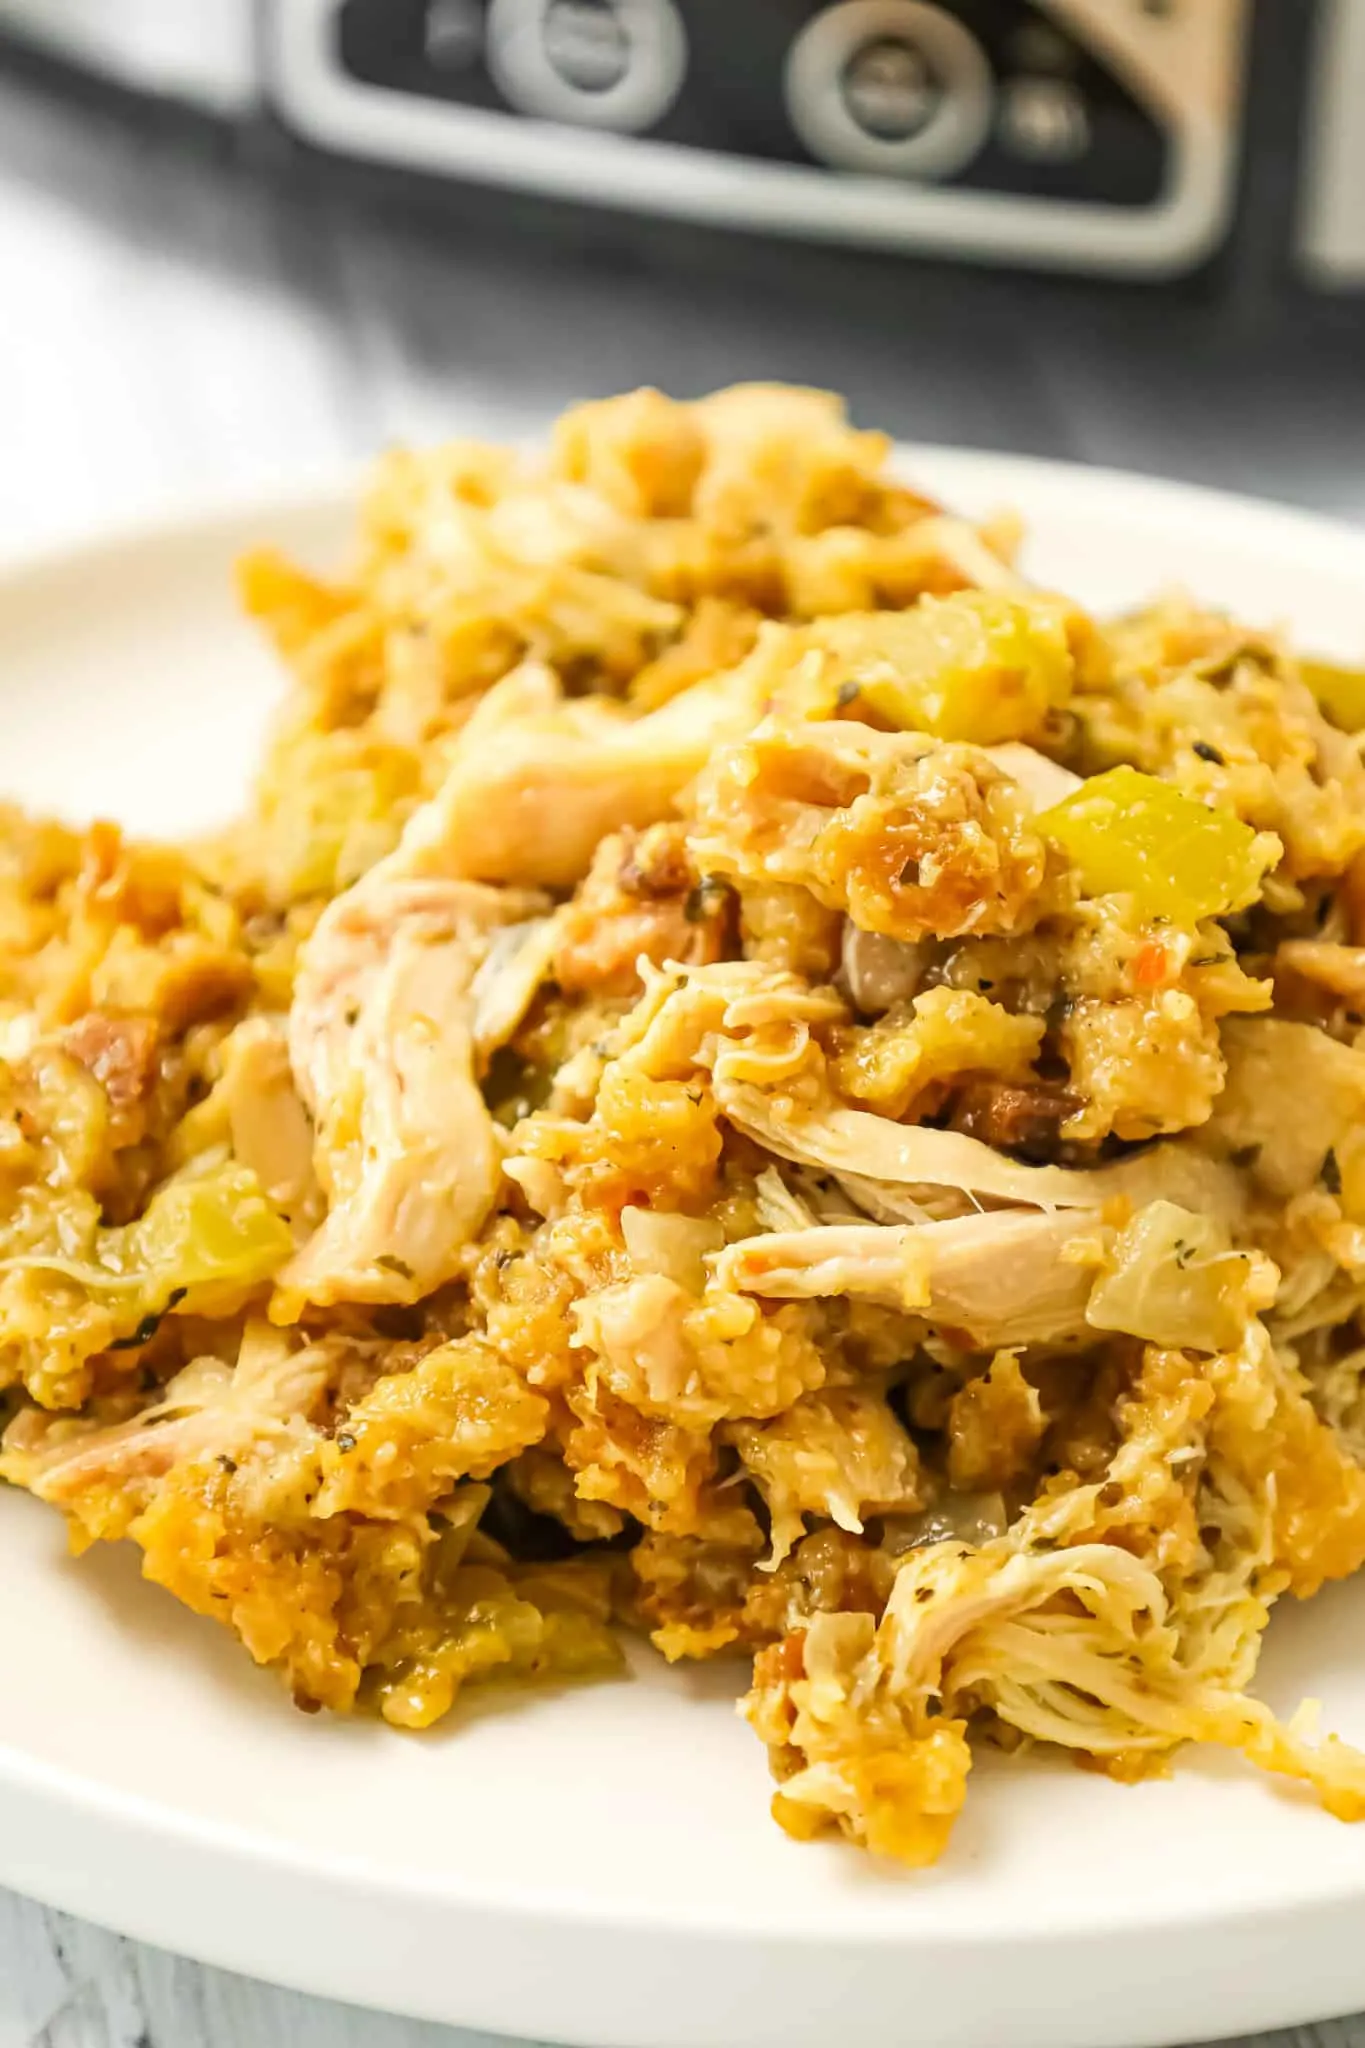 Crock Pot Chicken and Stuffing is a hearty slow cooker dinner recipe made with boneless, skinless chicken thighs and Stove Top stuffing mix.